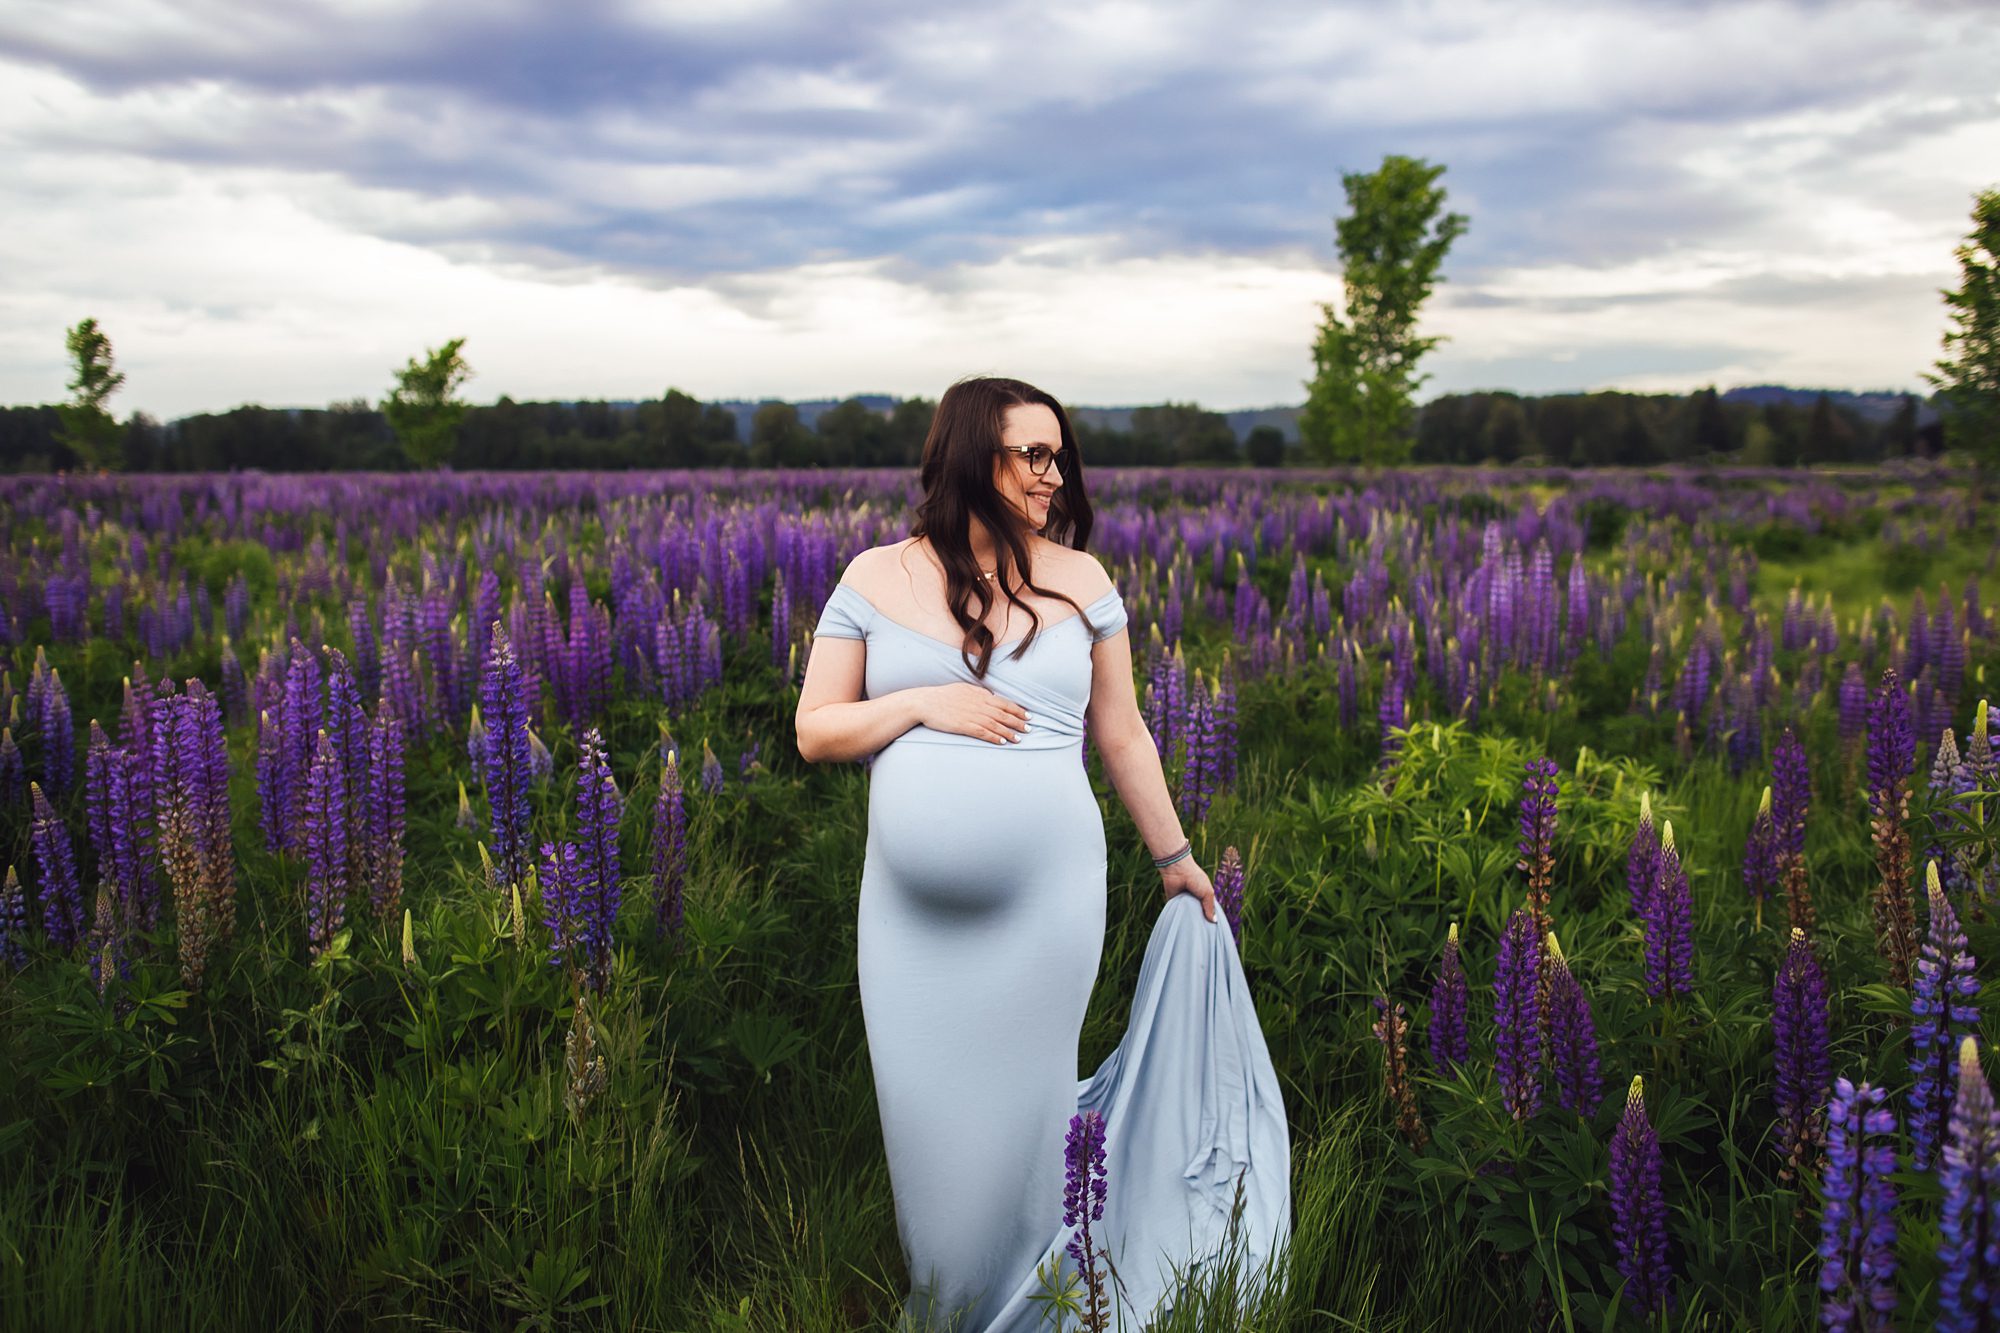 puyallup farm 12 lupines maternity photography session